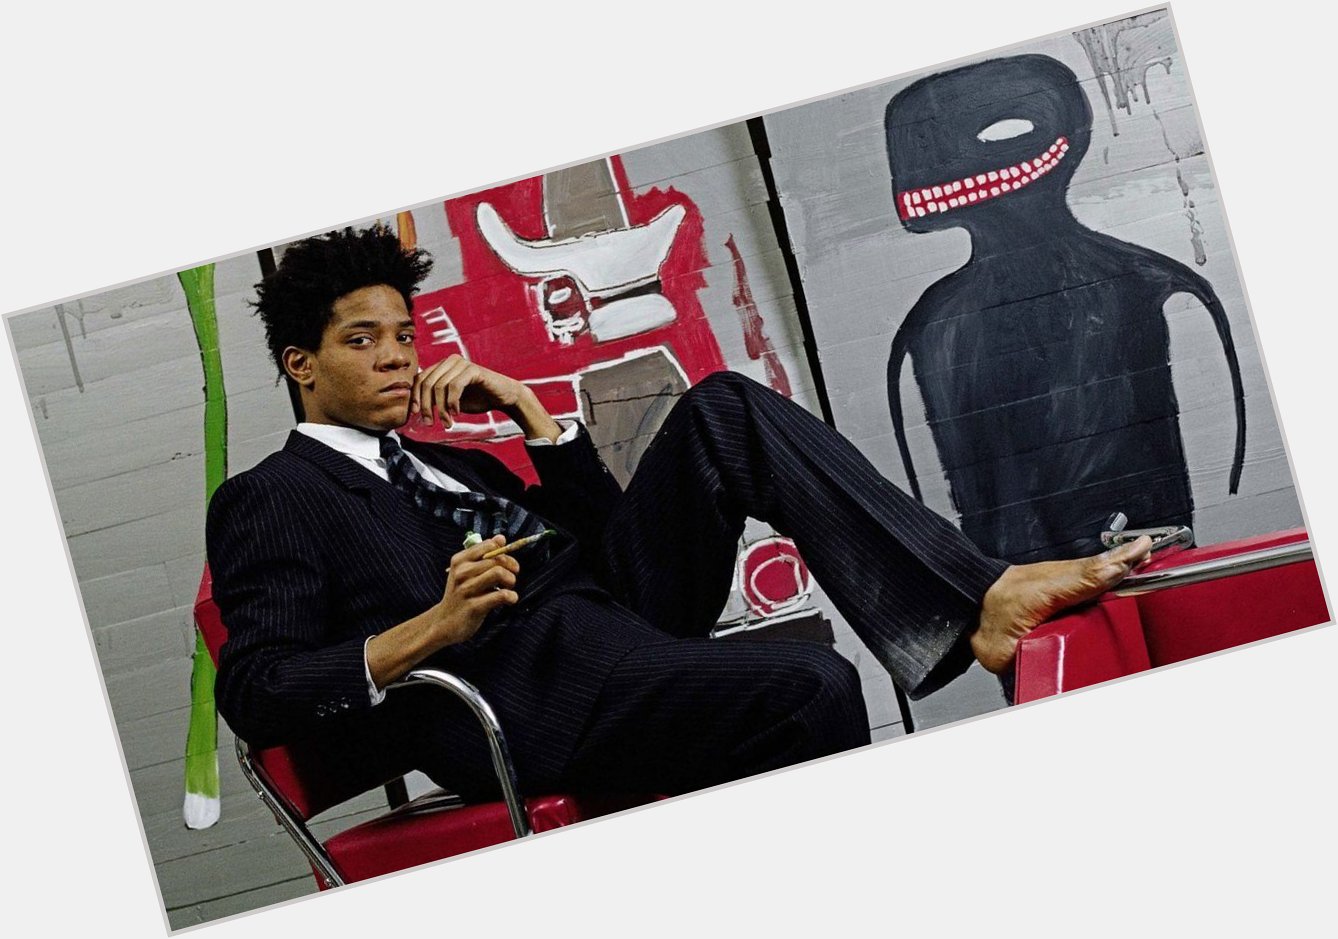 Happy birthday to one of my heroes, Jean-Michel Basquiat 